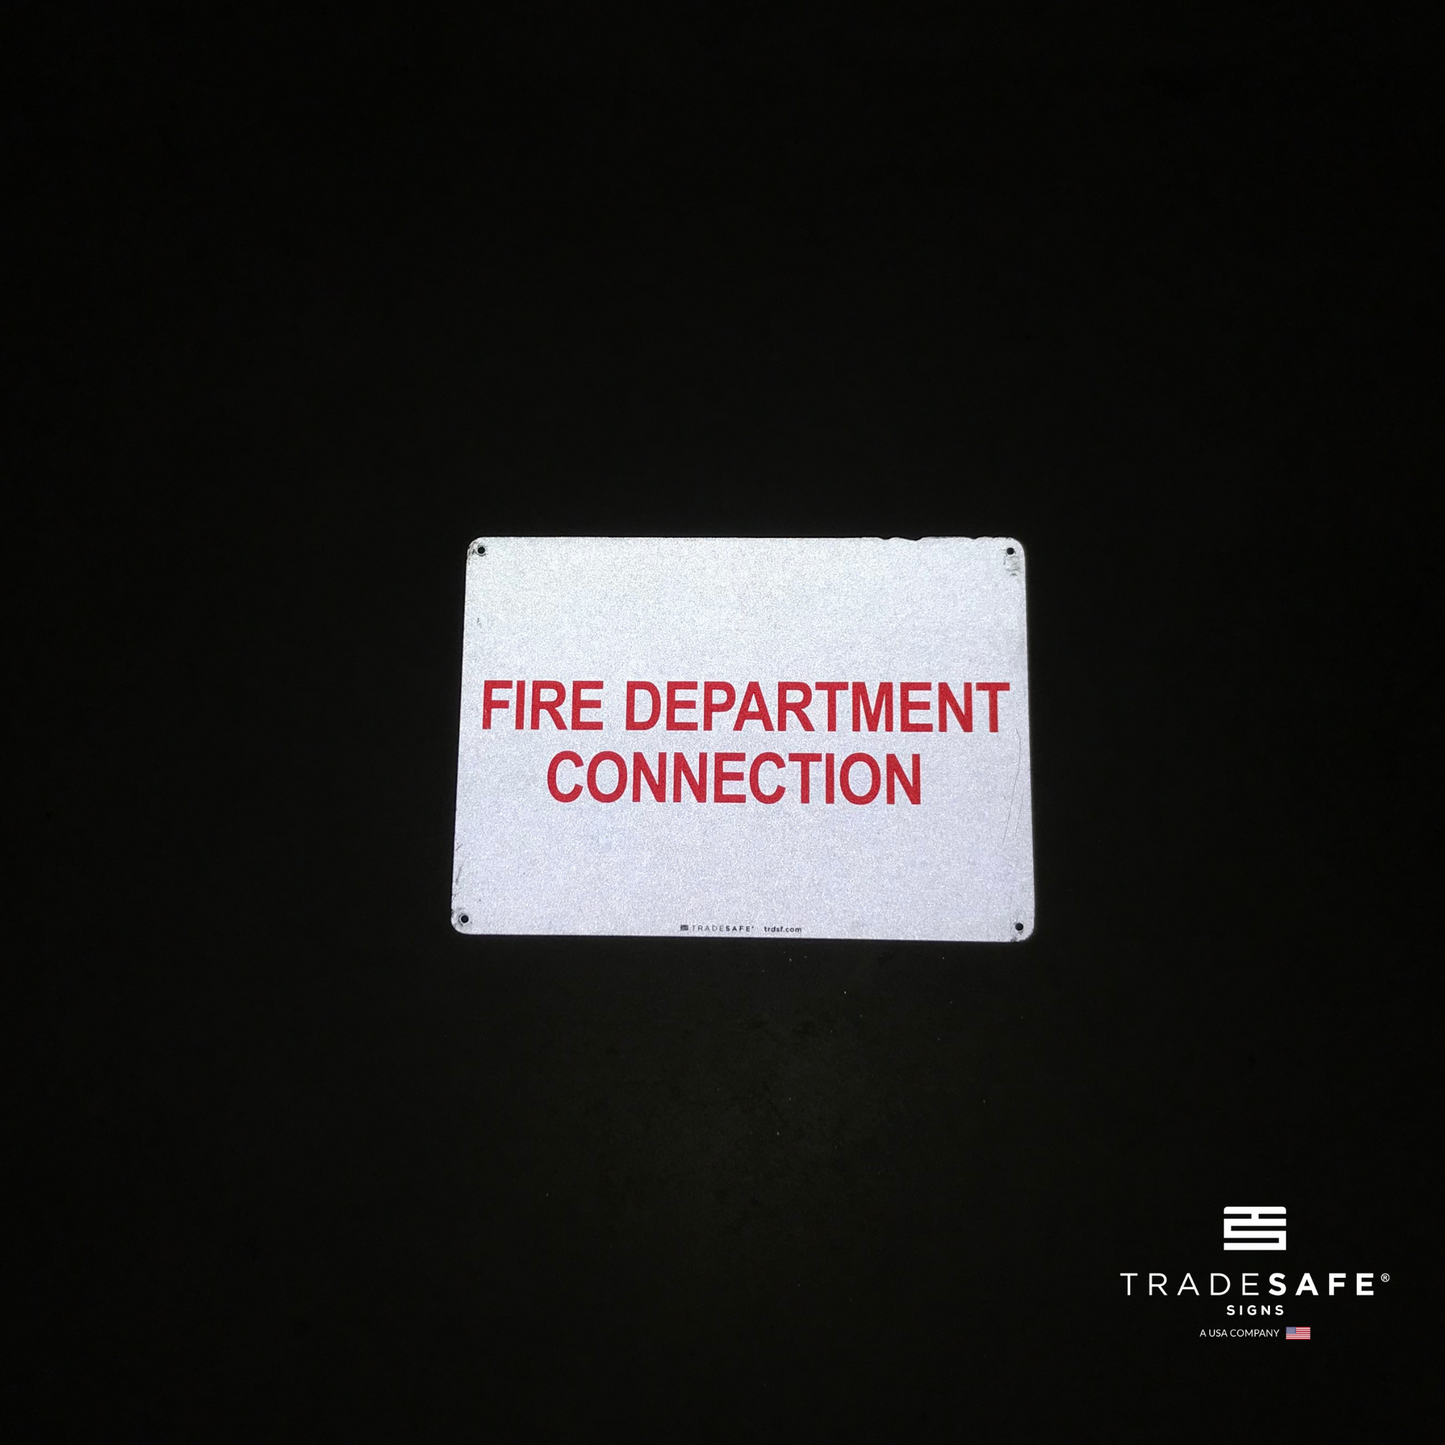 reflective attribute of fire safety sign on black background